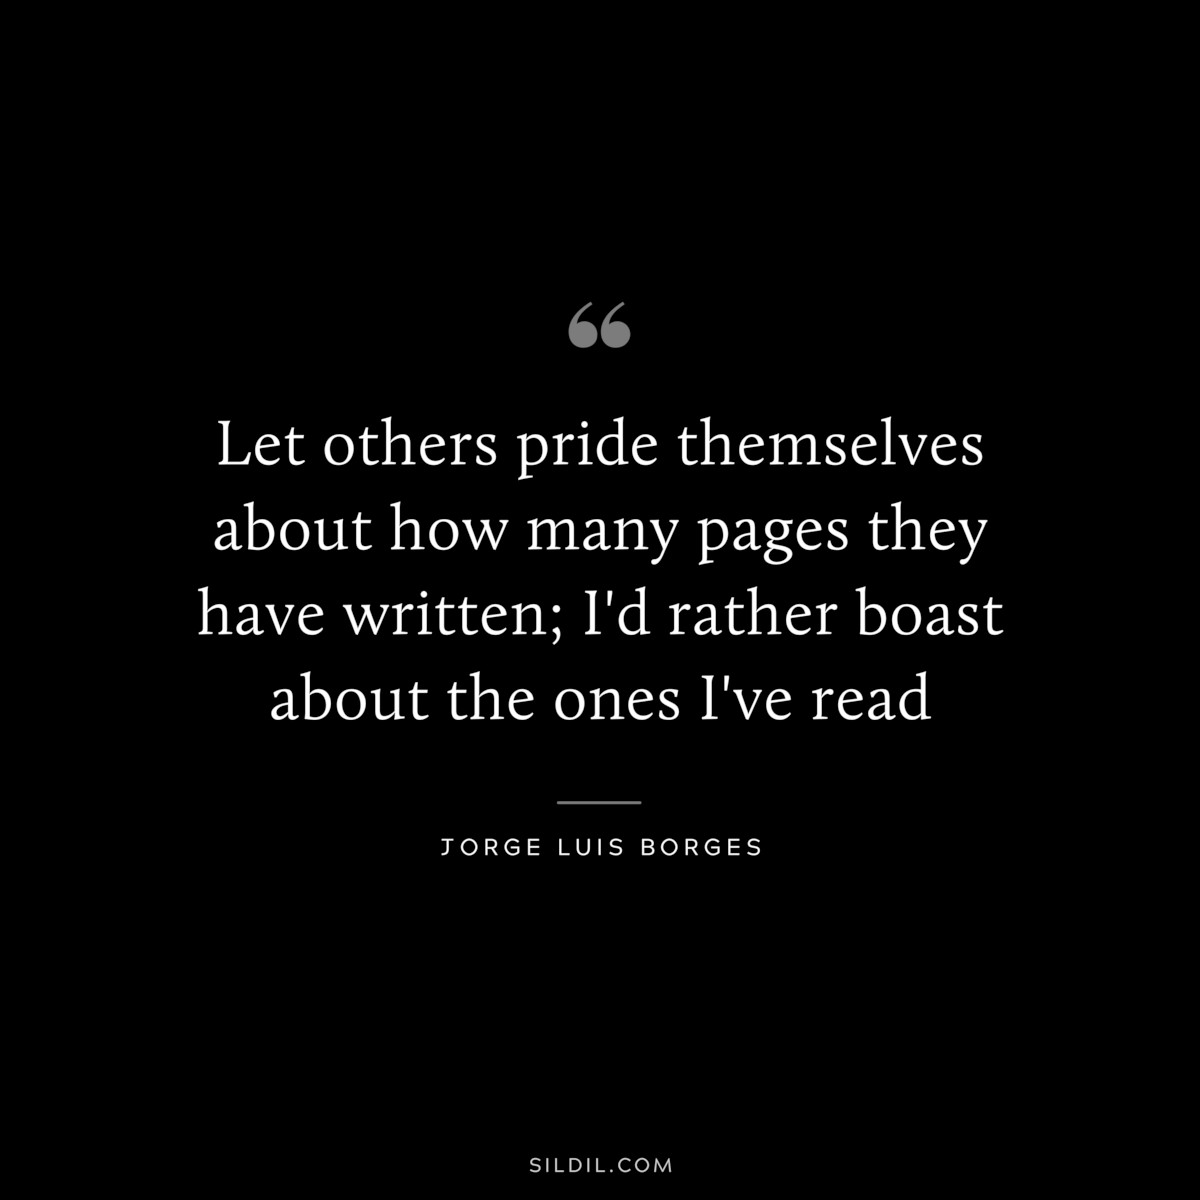 Let others pride themselves about how many pages they have written; I'd rather boast about the ones I've read ― Jorge Luis Borges